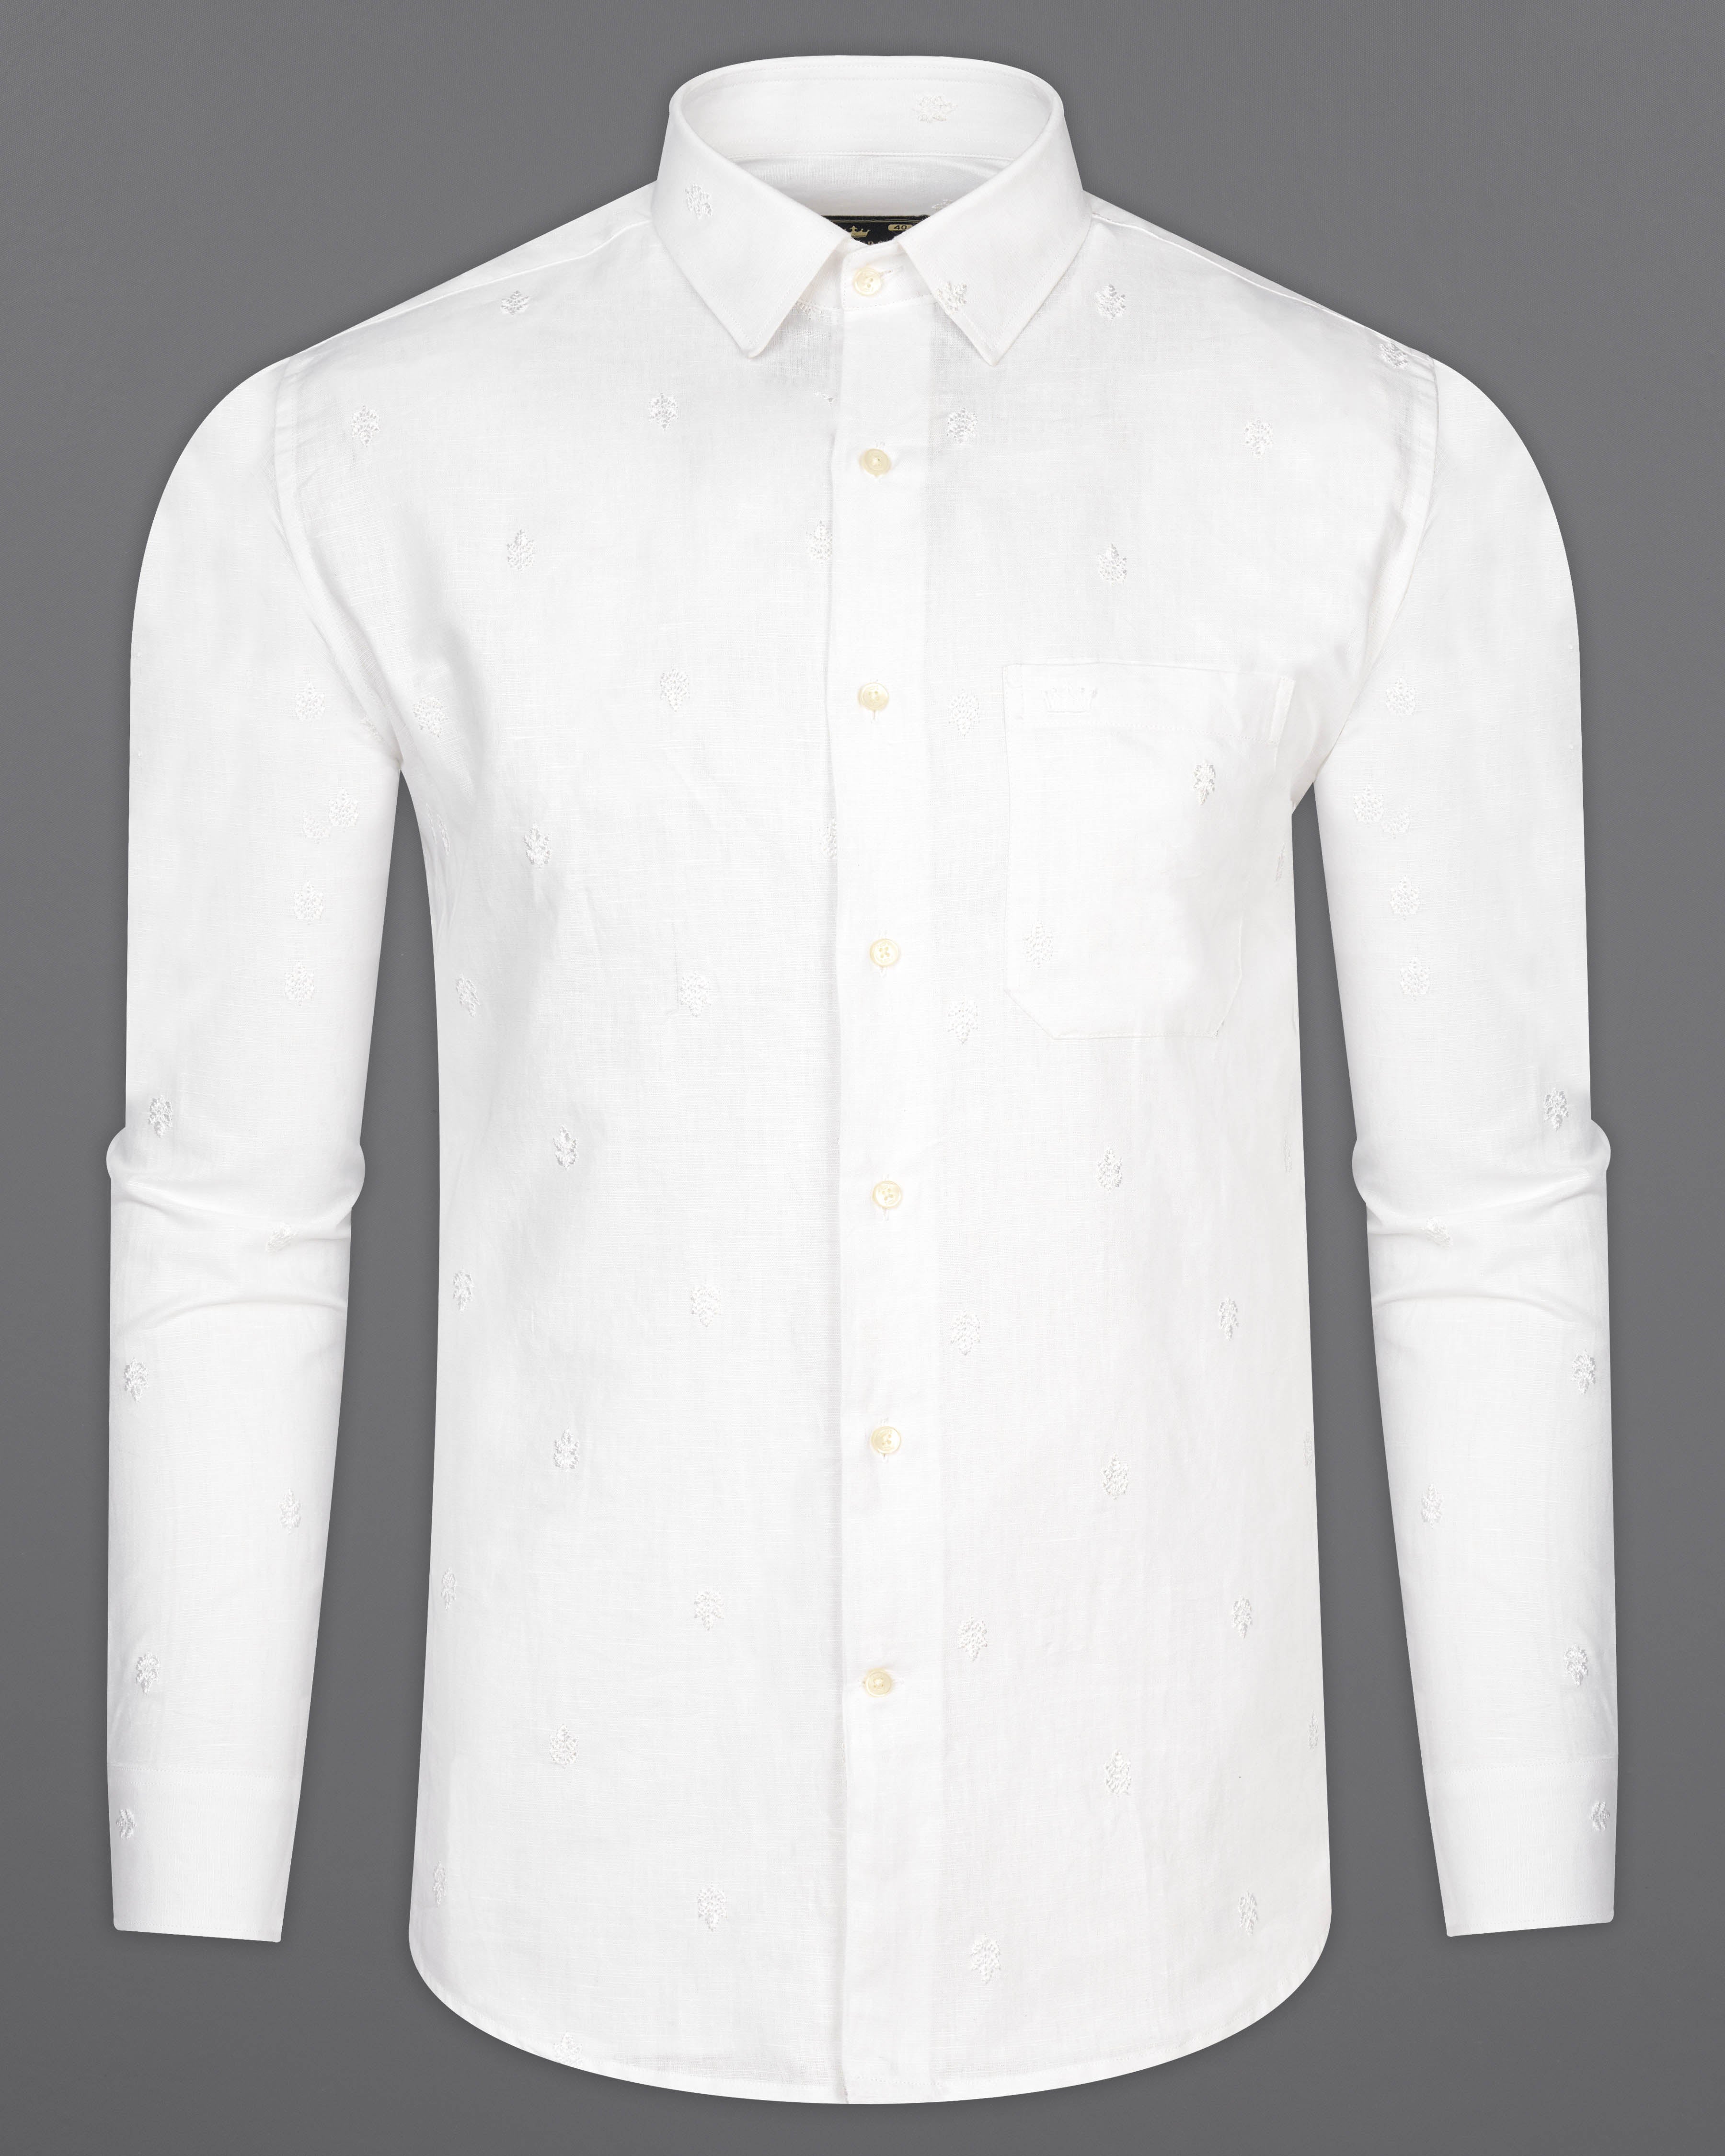 Bright White Embroidered Luxurious Linen Shirt 9708-38, 9708-H-38, 9708-39, 9708-H-39, 9708-40, 9708-H-40, 9708-42, 9708-H-42, 9708-44, 9708-H-44, 9708-46, 9708-H-46, 9708-48, 9708-H-48, 9708-50, 9708-H-50, 9708-52, 9708-H-52